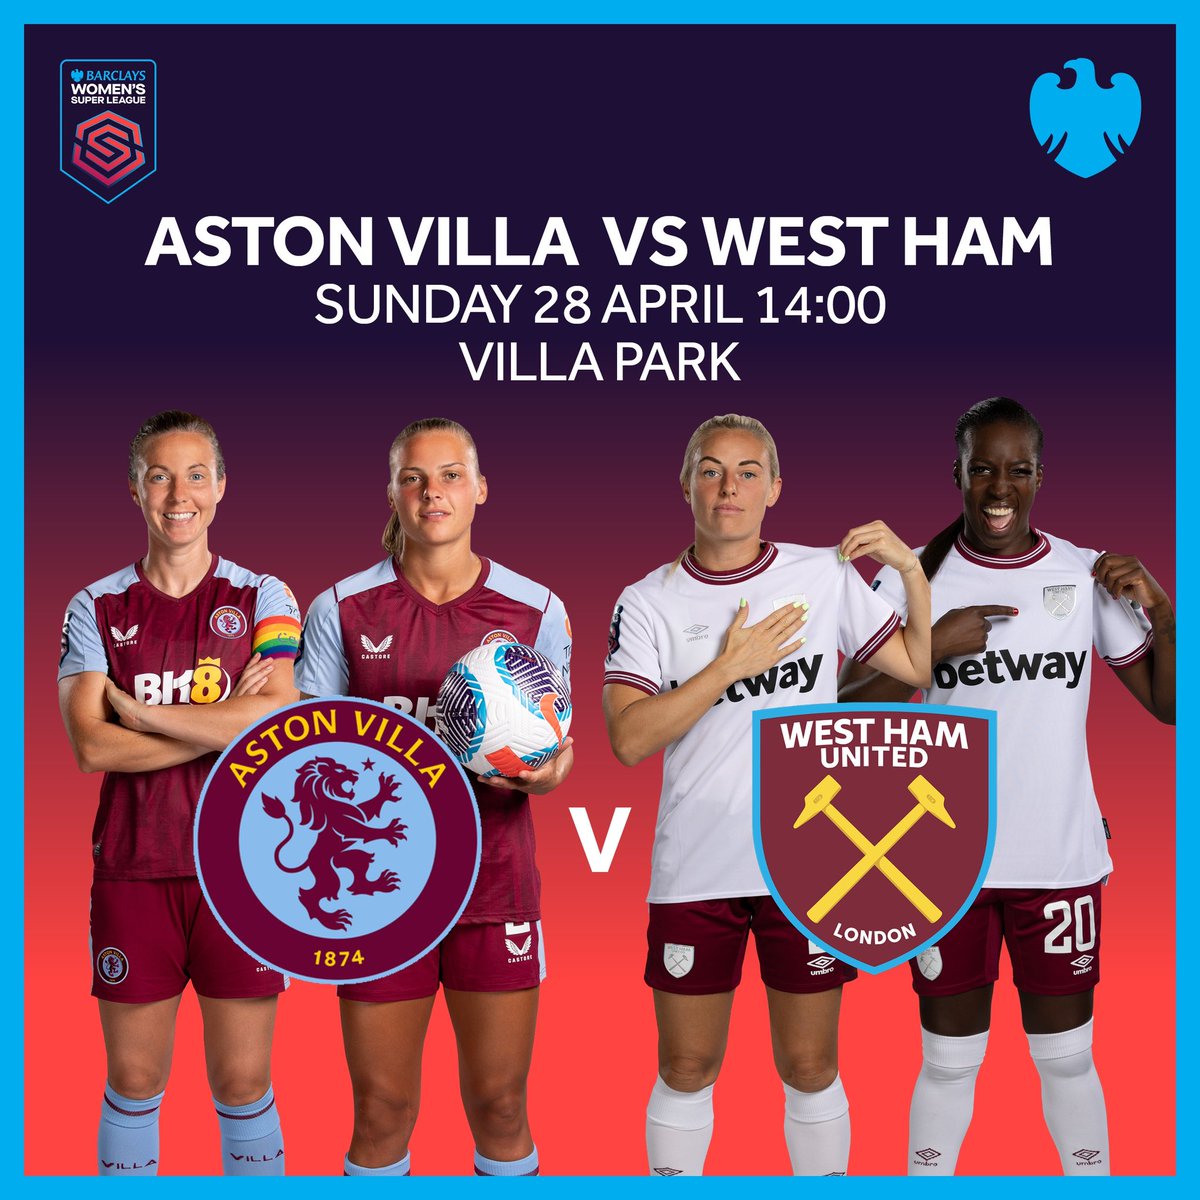 This Sunday sees a battle of claret commence as Aston Villa take on West Ham at Villa Park. Big Games mean you can expect big moments. Before battle commences on the pitch, check out our Golden Zone where every play equals a win 🦁⚒T&Cs apply.